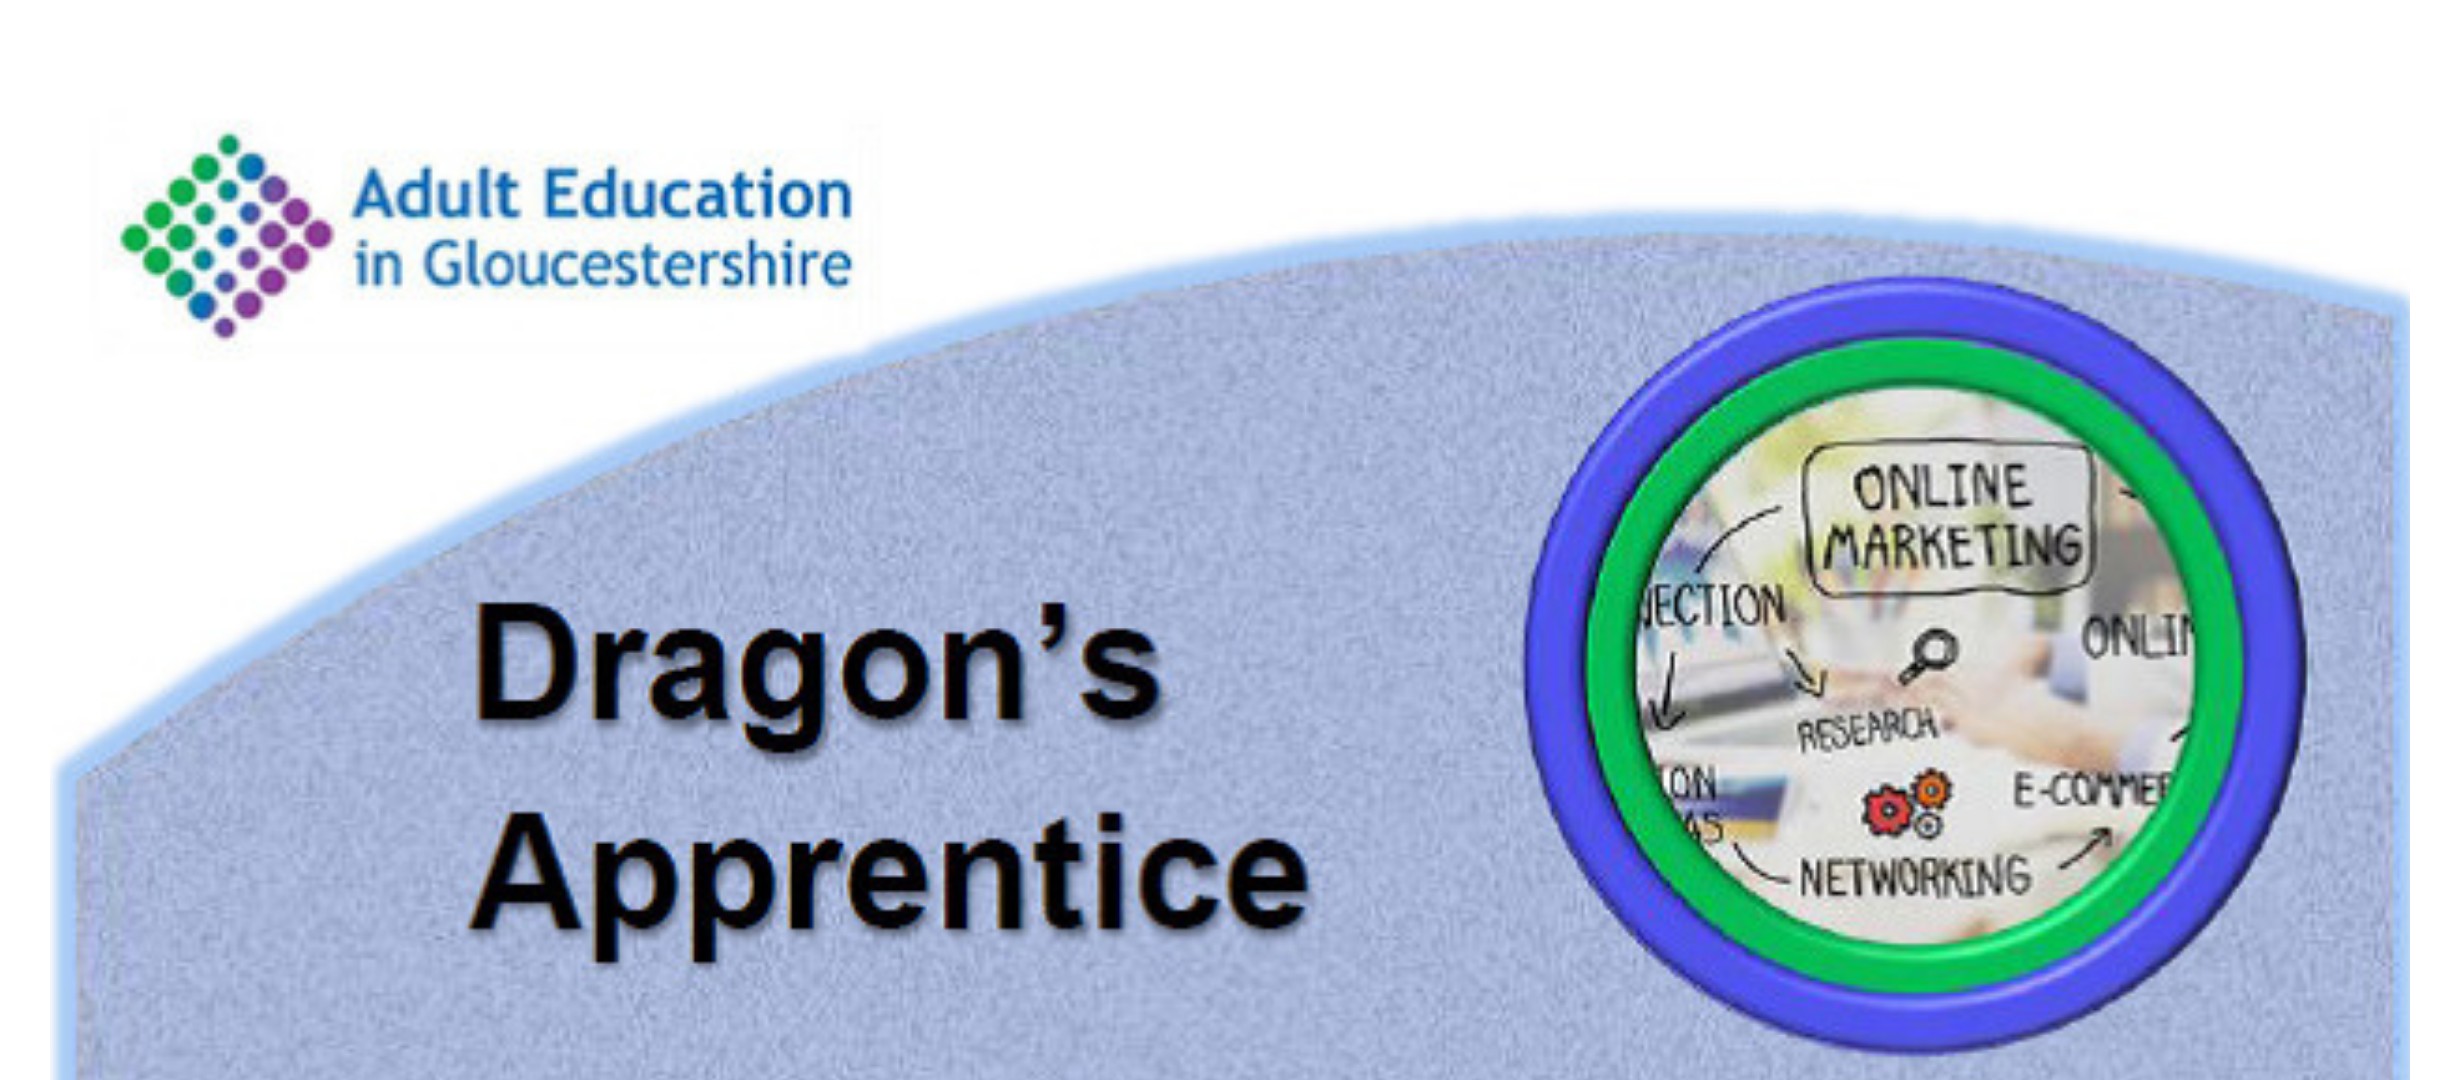 Adult education logo, text 'Dragon's apprentice' more text 'online marketing, research, networking'